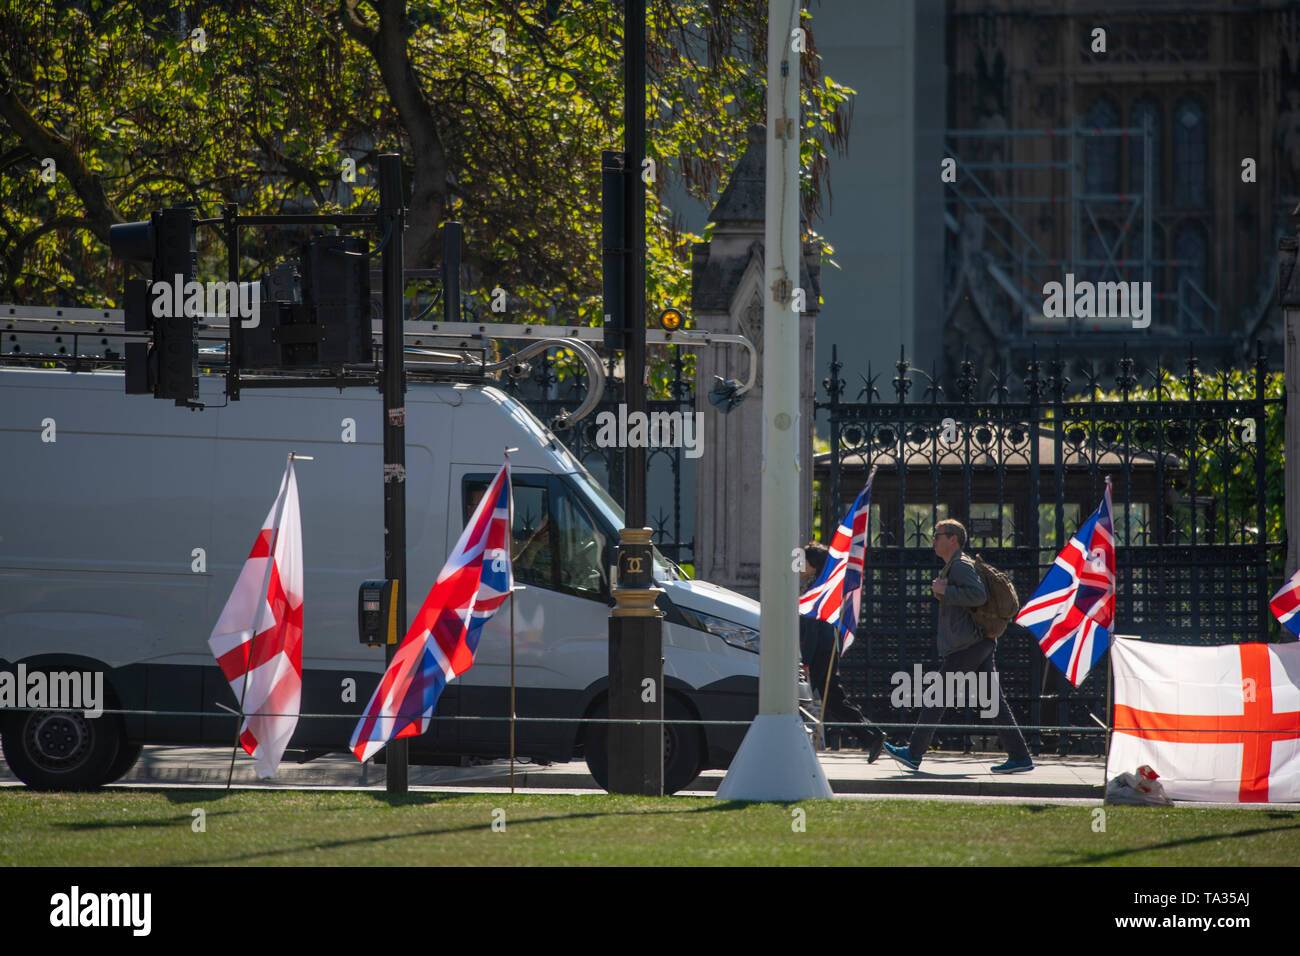 Brexit Party stickers and national flags line Parliament Square on 21st May 2019, before the EU MEP elections on May 23rd. Credit: Malcolm Park/Alamy. Stock Photo